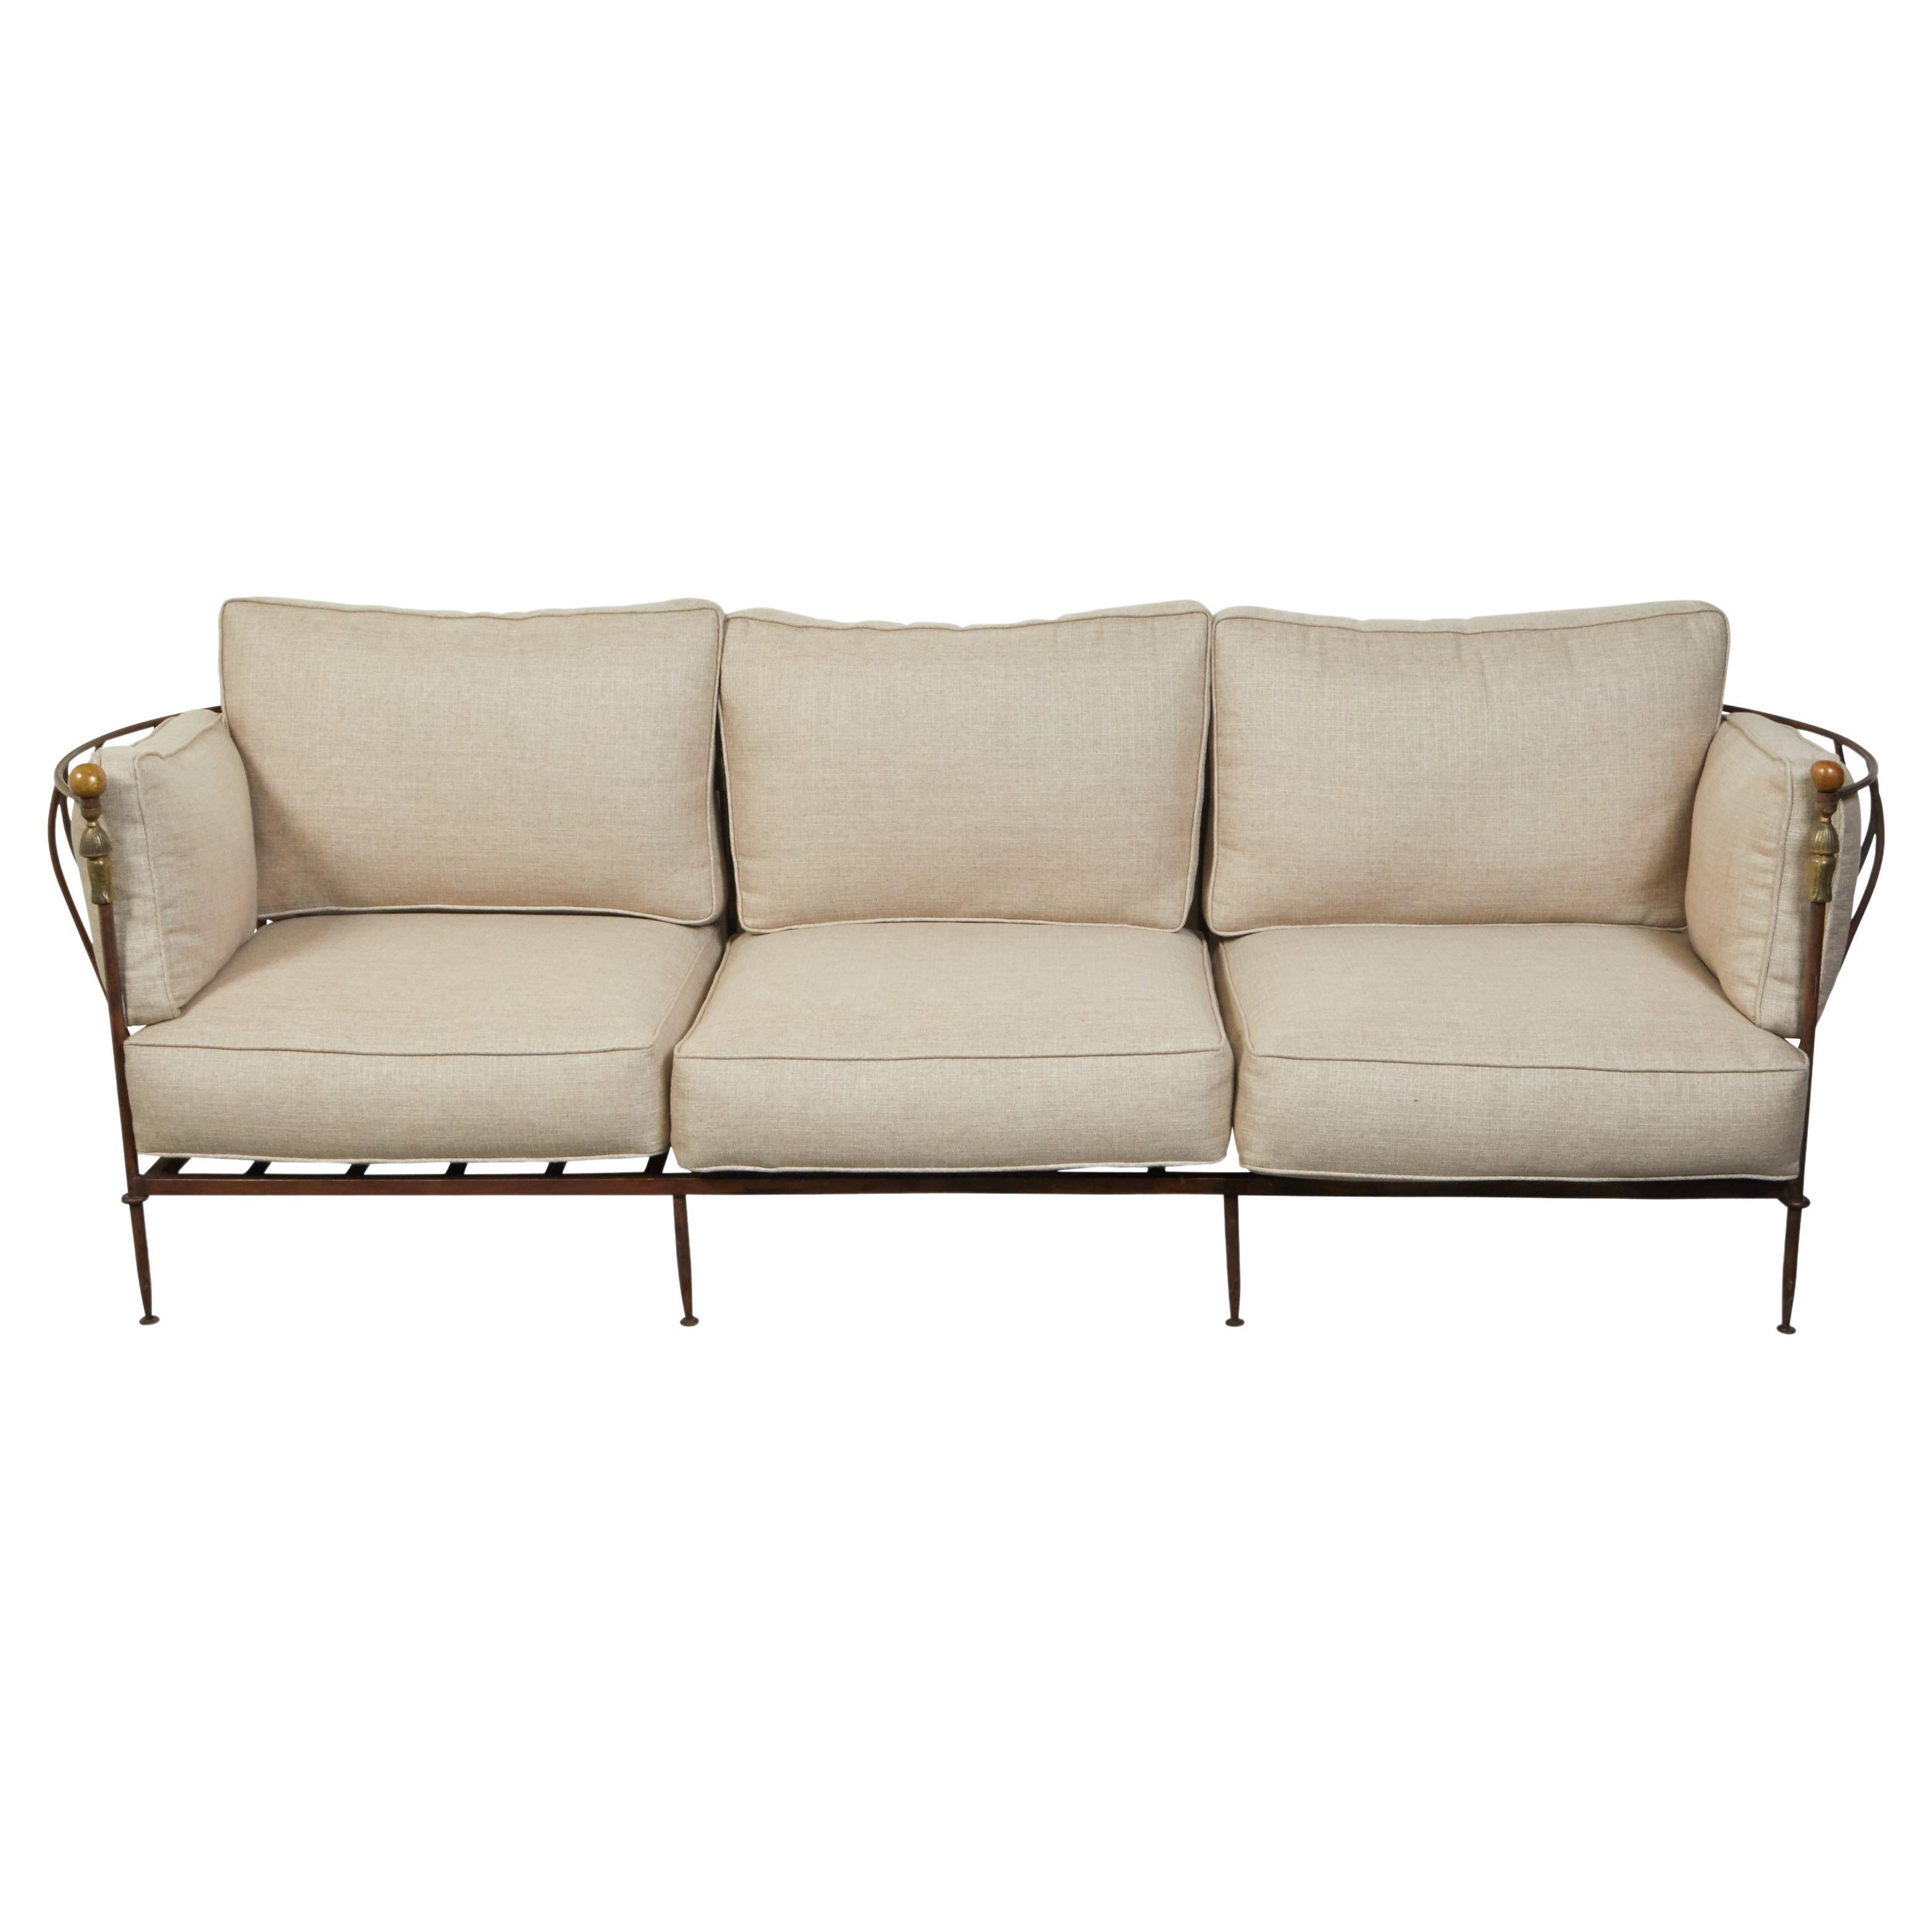 Steel and Brass Mid-Century Michael Taylor Three-Seat Sofa with Linen Upholstery For Sale